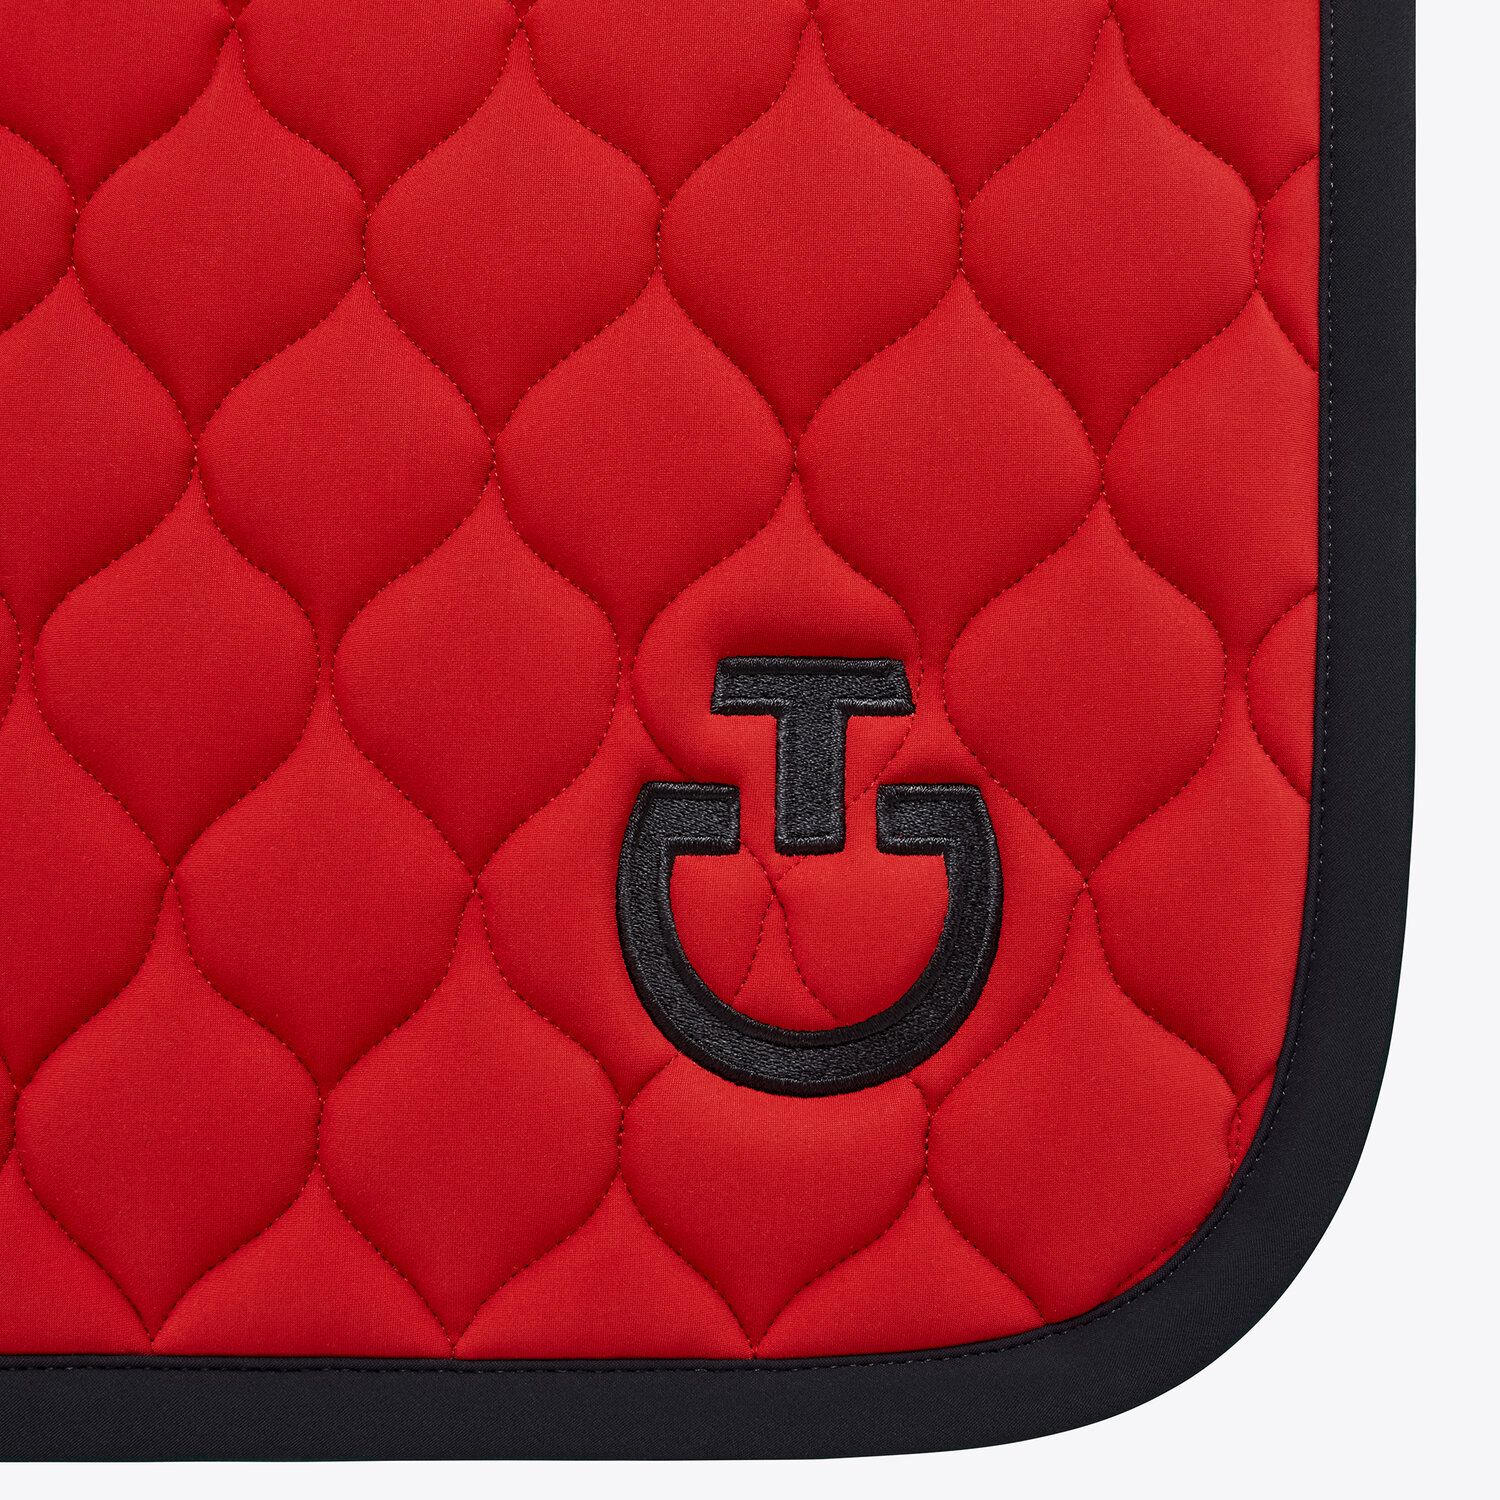 CIRCULAR QUILTED JERSEY JUMPING SADDLE PAD RED/BLACK